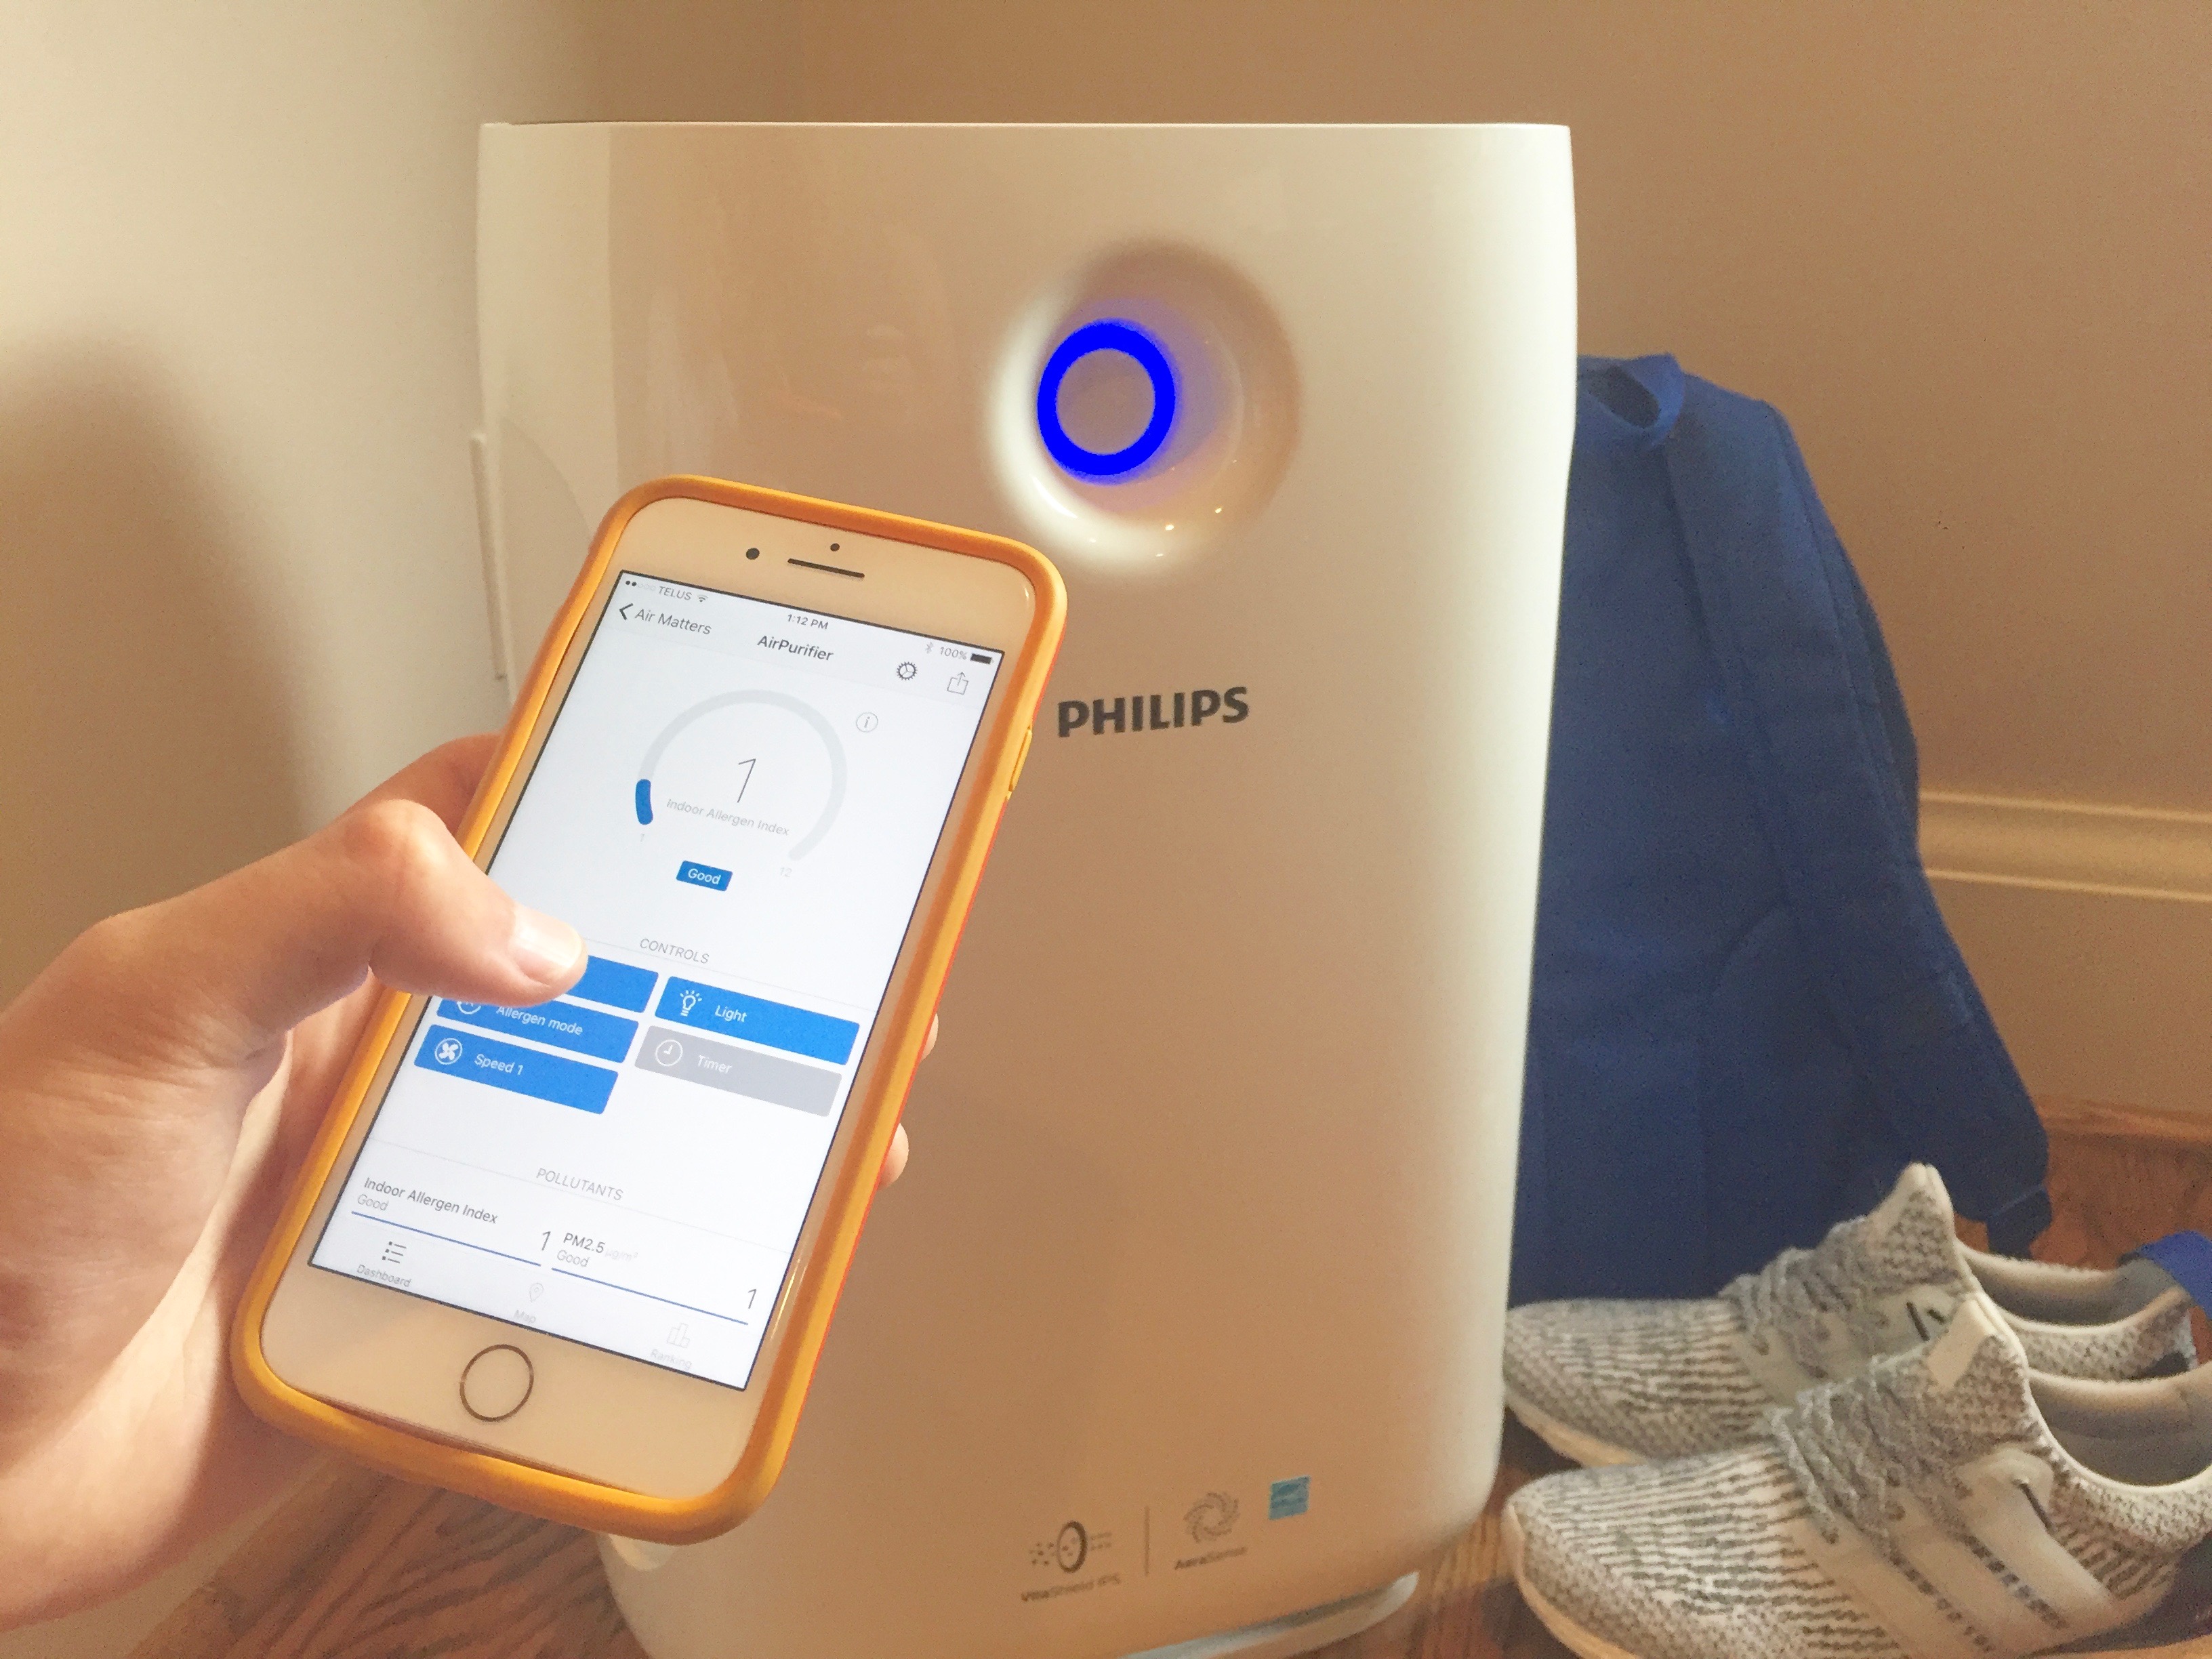 Philips Air. Air matters. Connected air